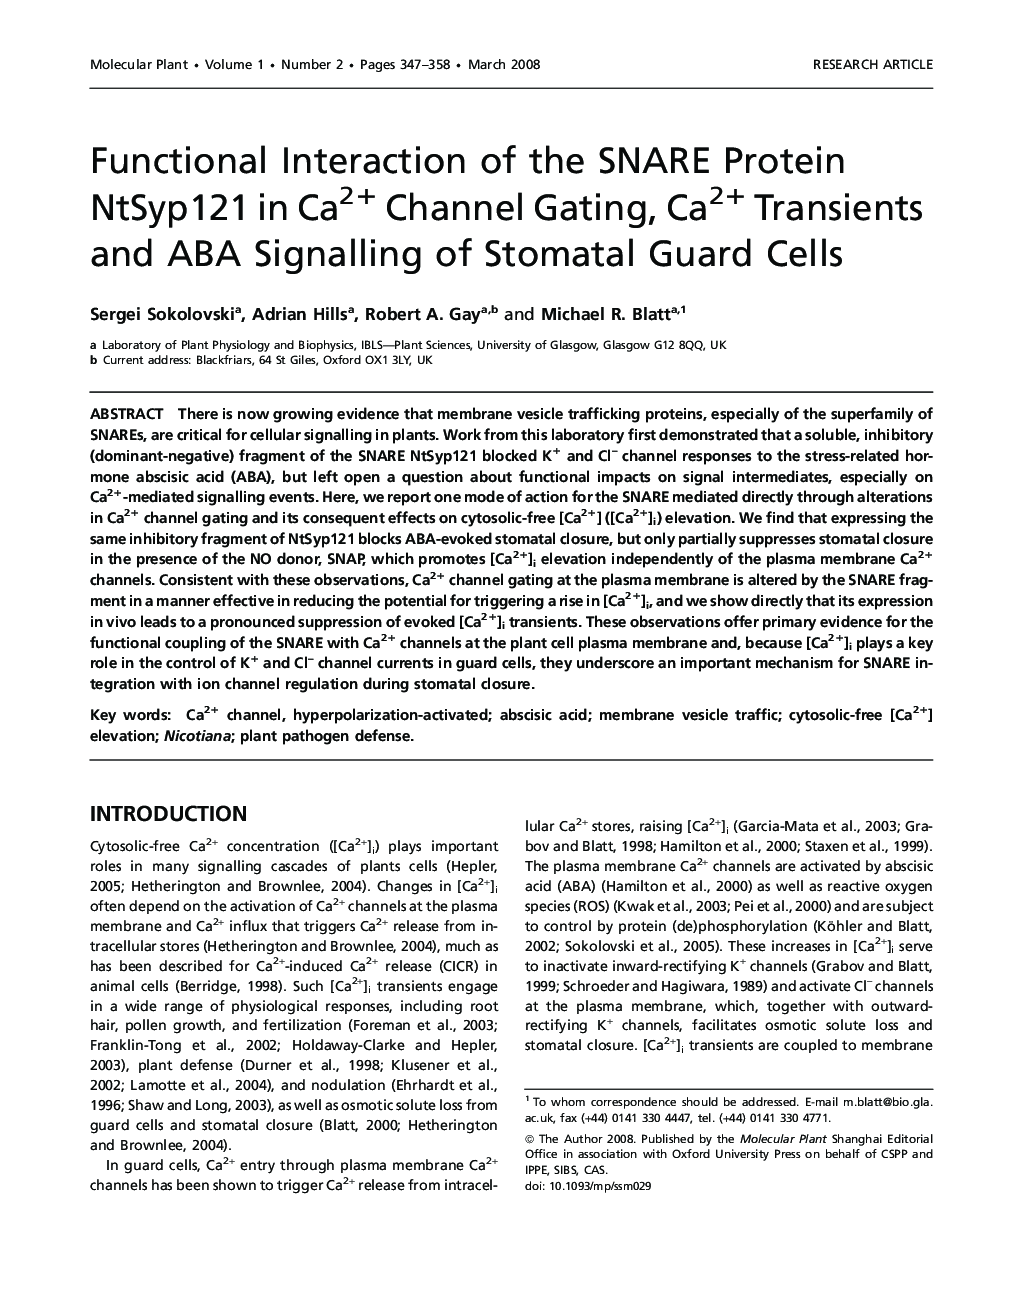 Functional Interaction of the SNARE Protein NtSyp121 in Ca2+ Channel Gating, Ca2+ Transients and ABA Signalling of Stomatal Guard Cells 